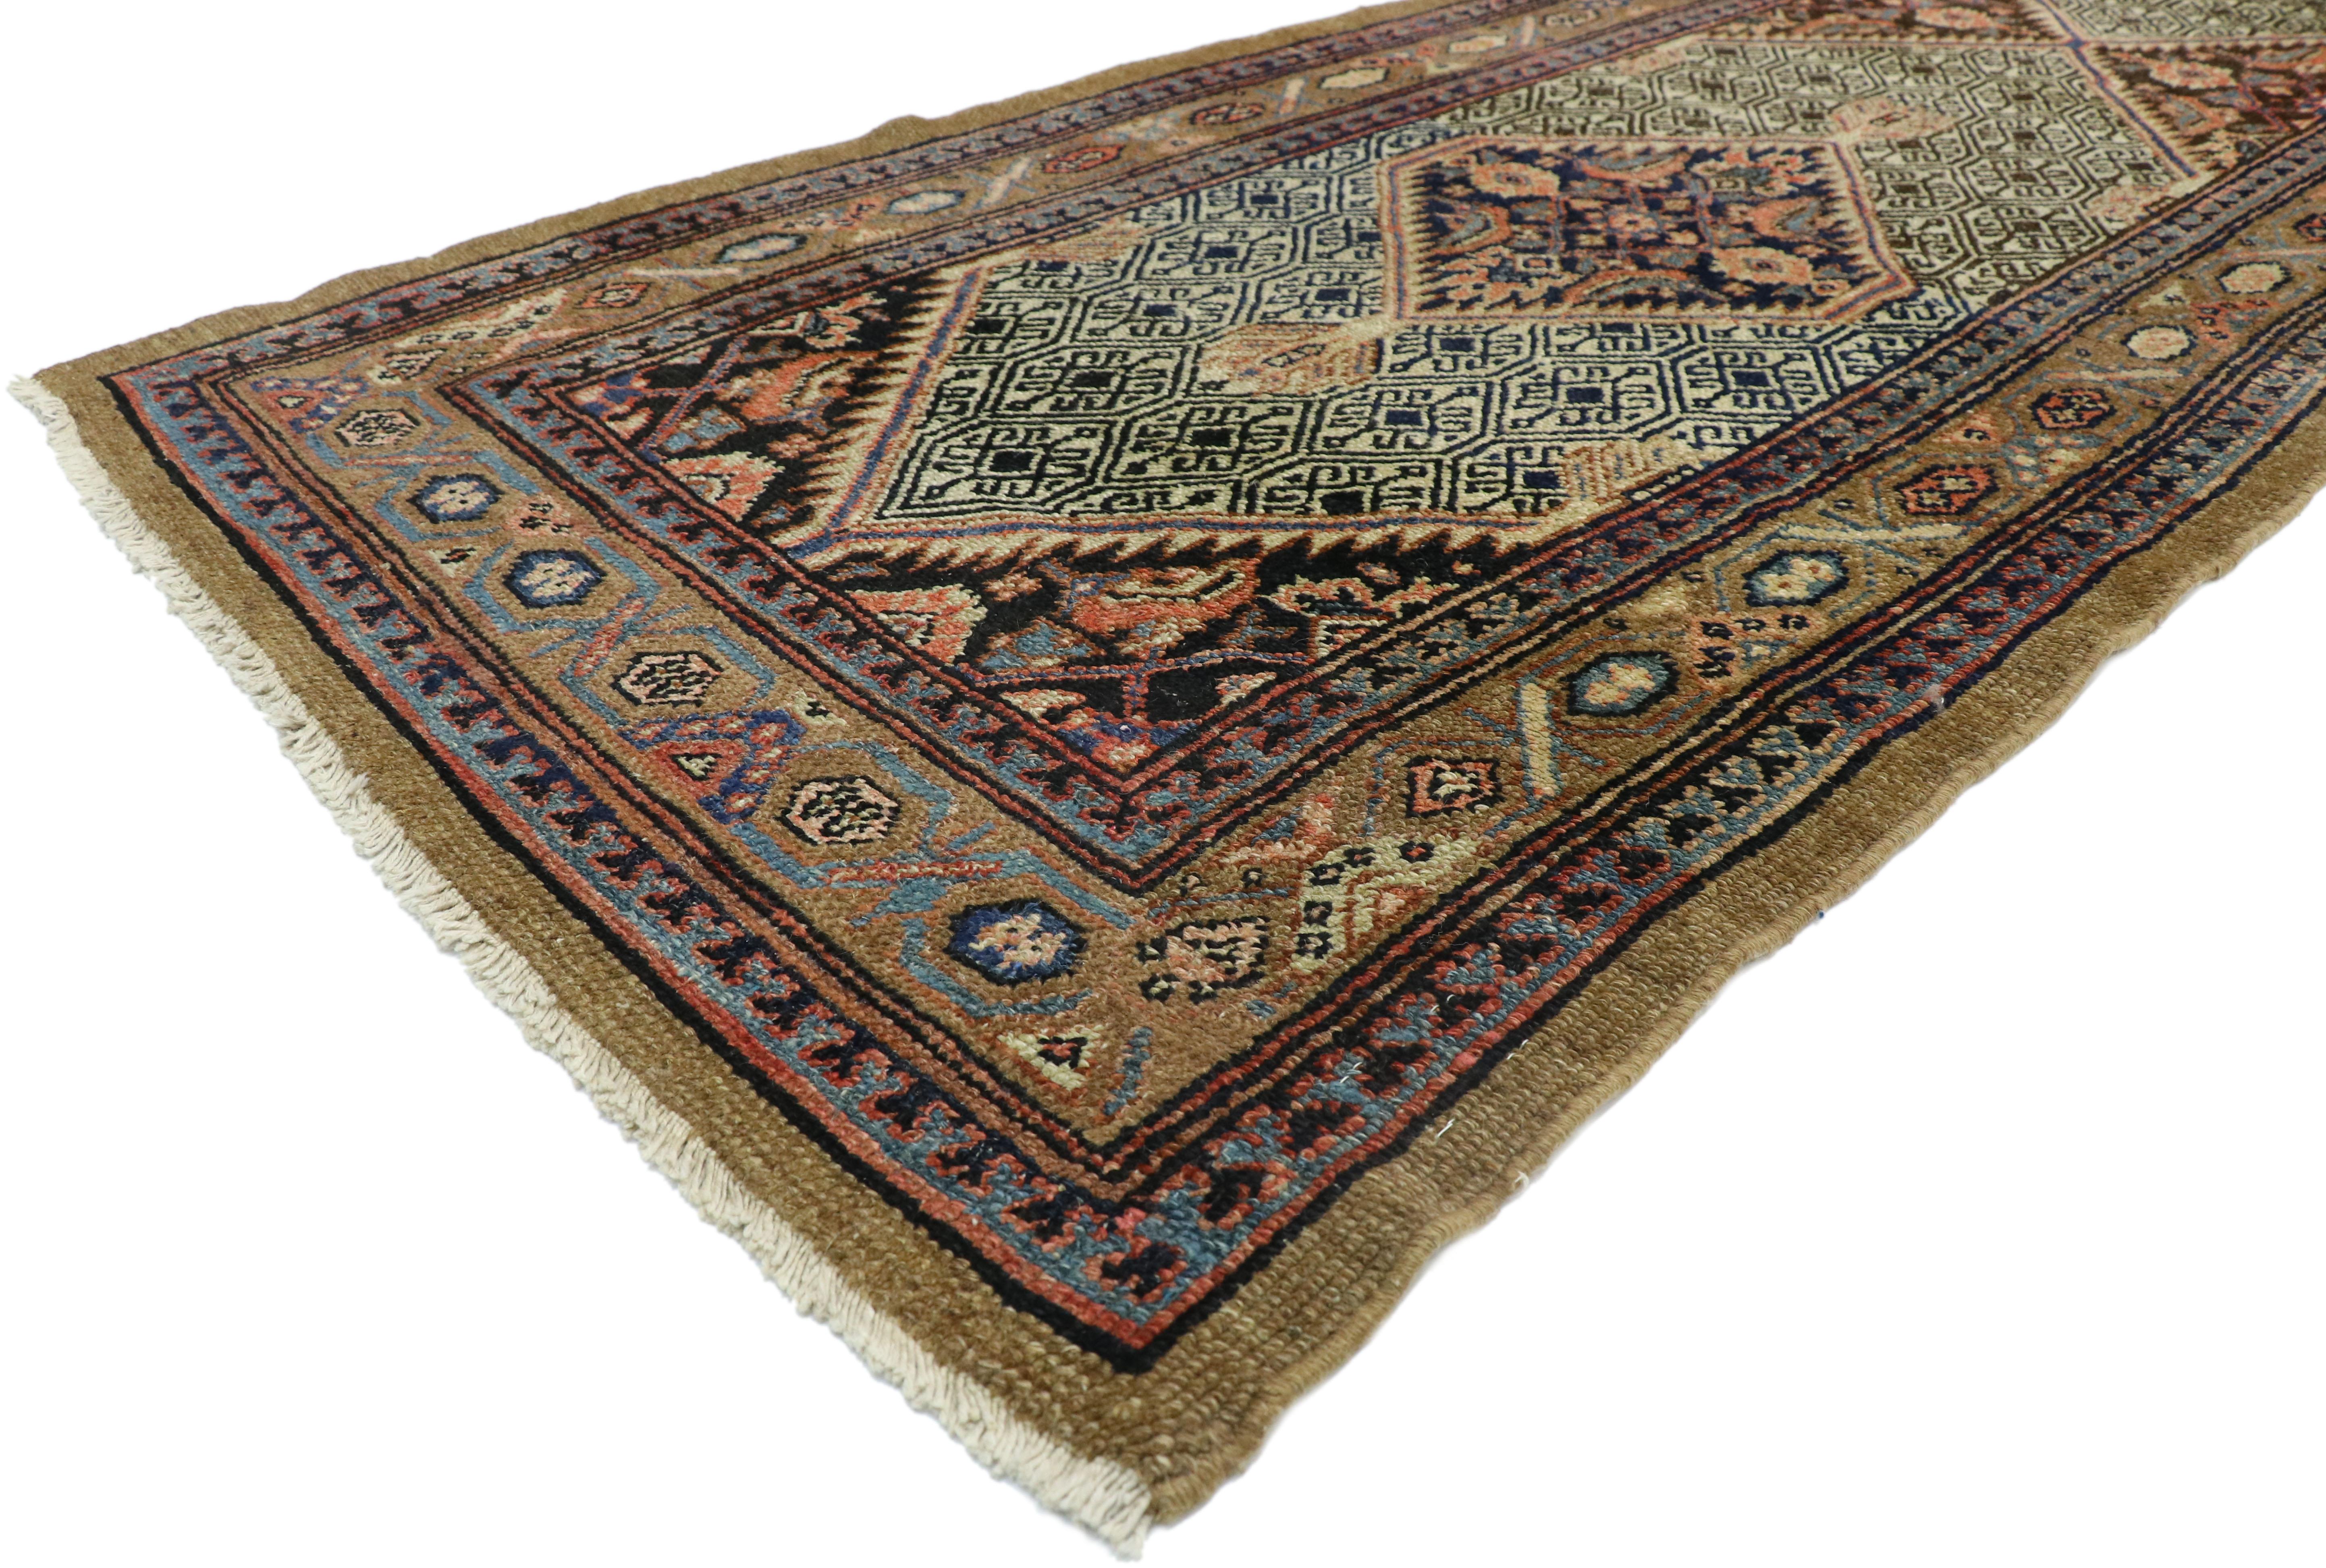 Camel Hair Antique Persian Malayer Extra-Long Runner with Arts and Crafts Style 5